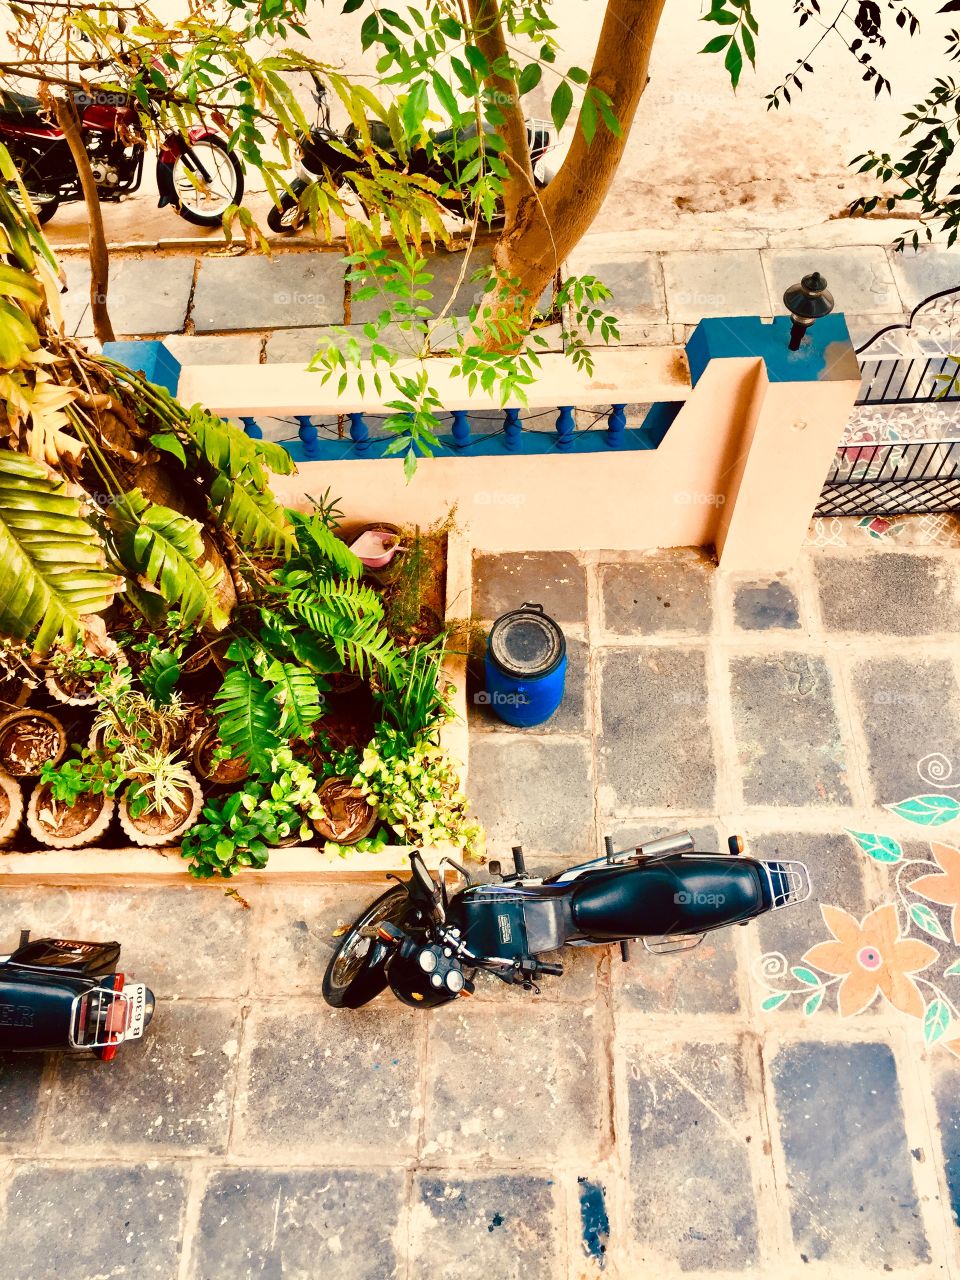 Aerial view of a small garden in my colleague’s compound house 🏡